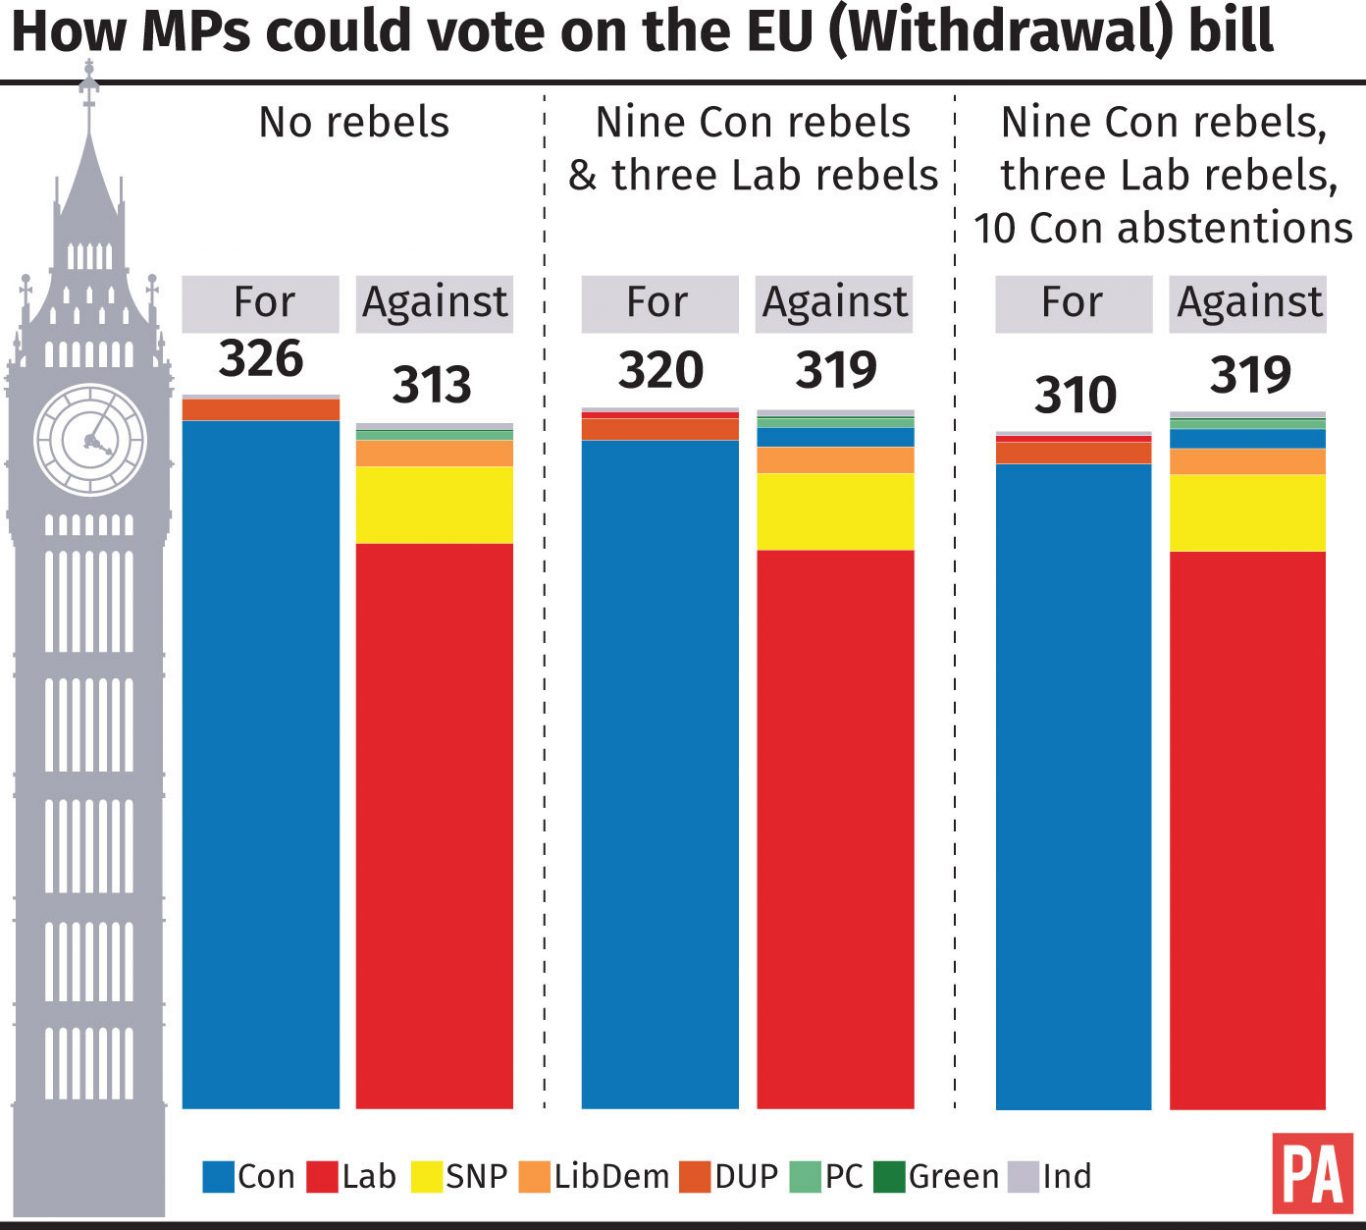 How MPs could vote on the EU (withdrawal) bill. 